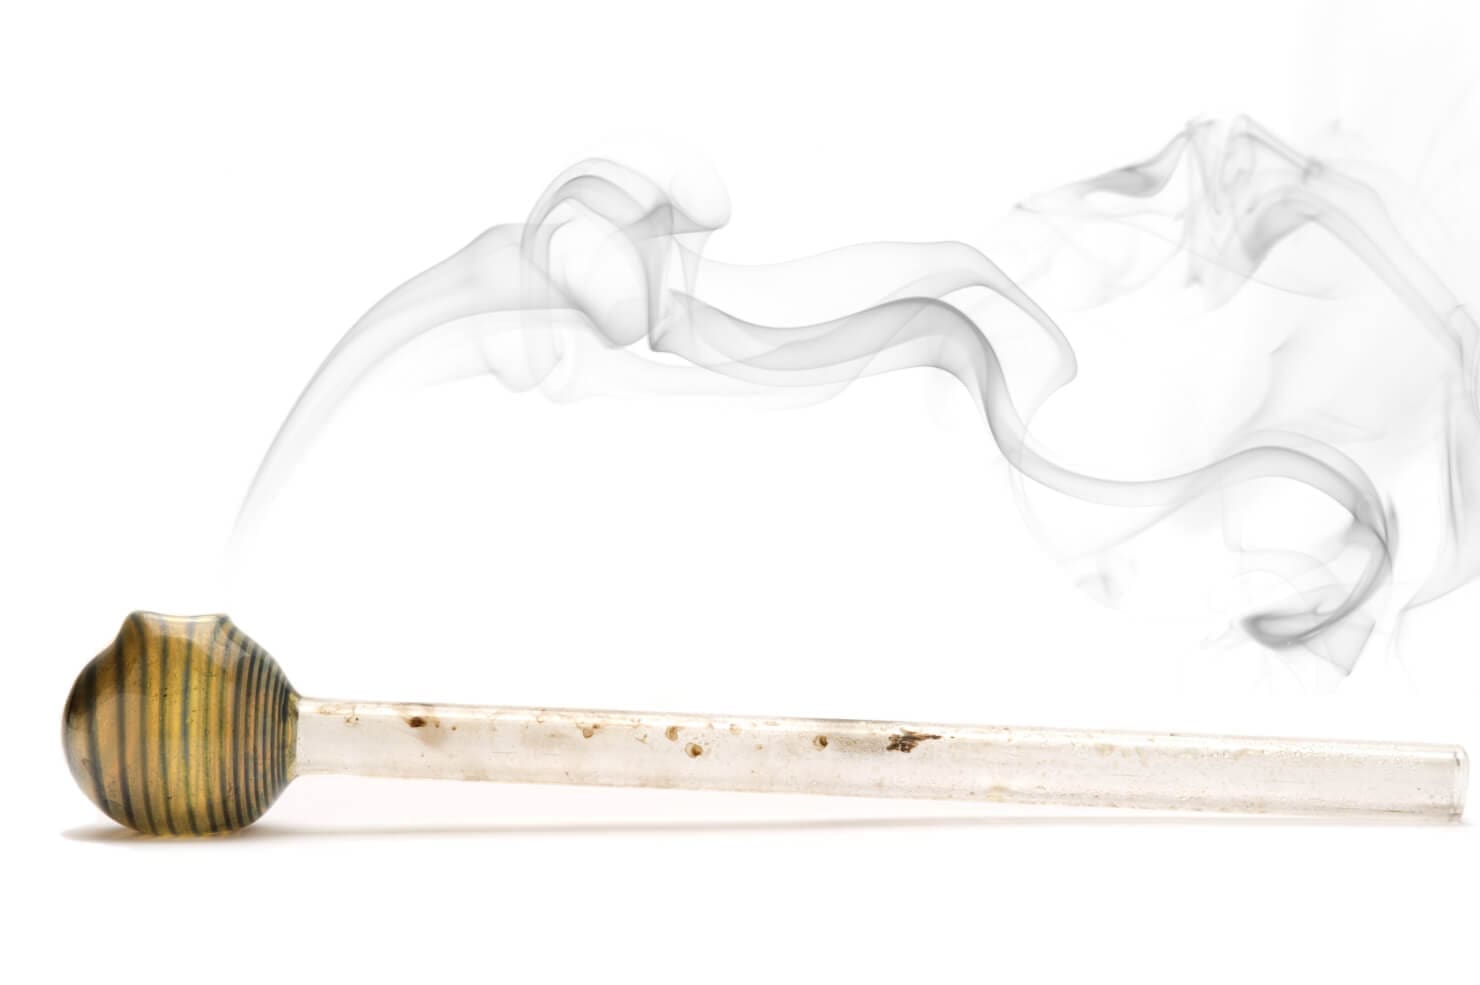 A pipe with smoke coming out of it, depicting addiction and the need for drug detox.